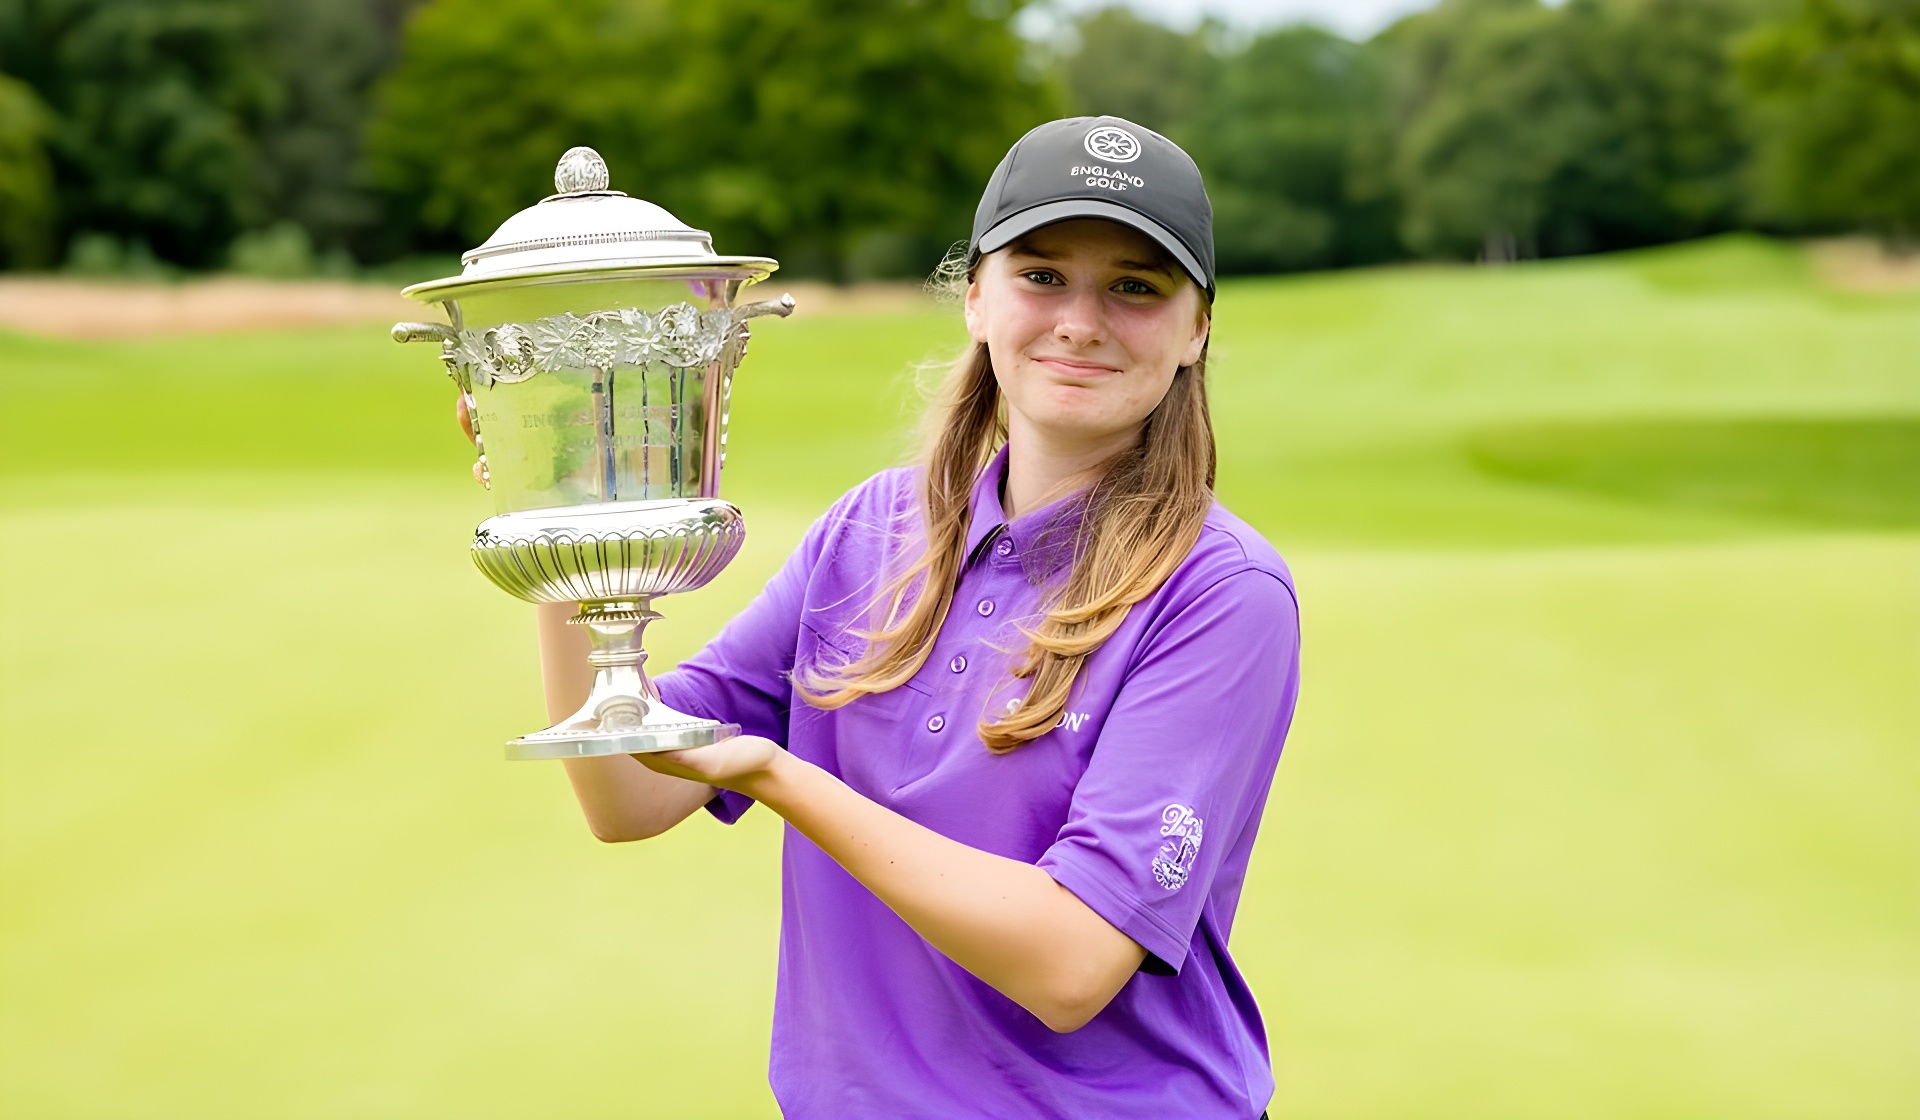 Lauren Crump holds the English Girls' Open Amateur Stroke Play Championship trophy